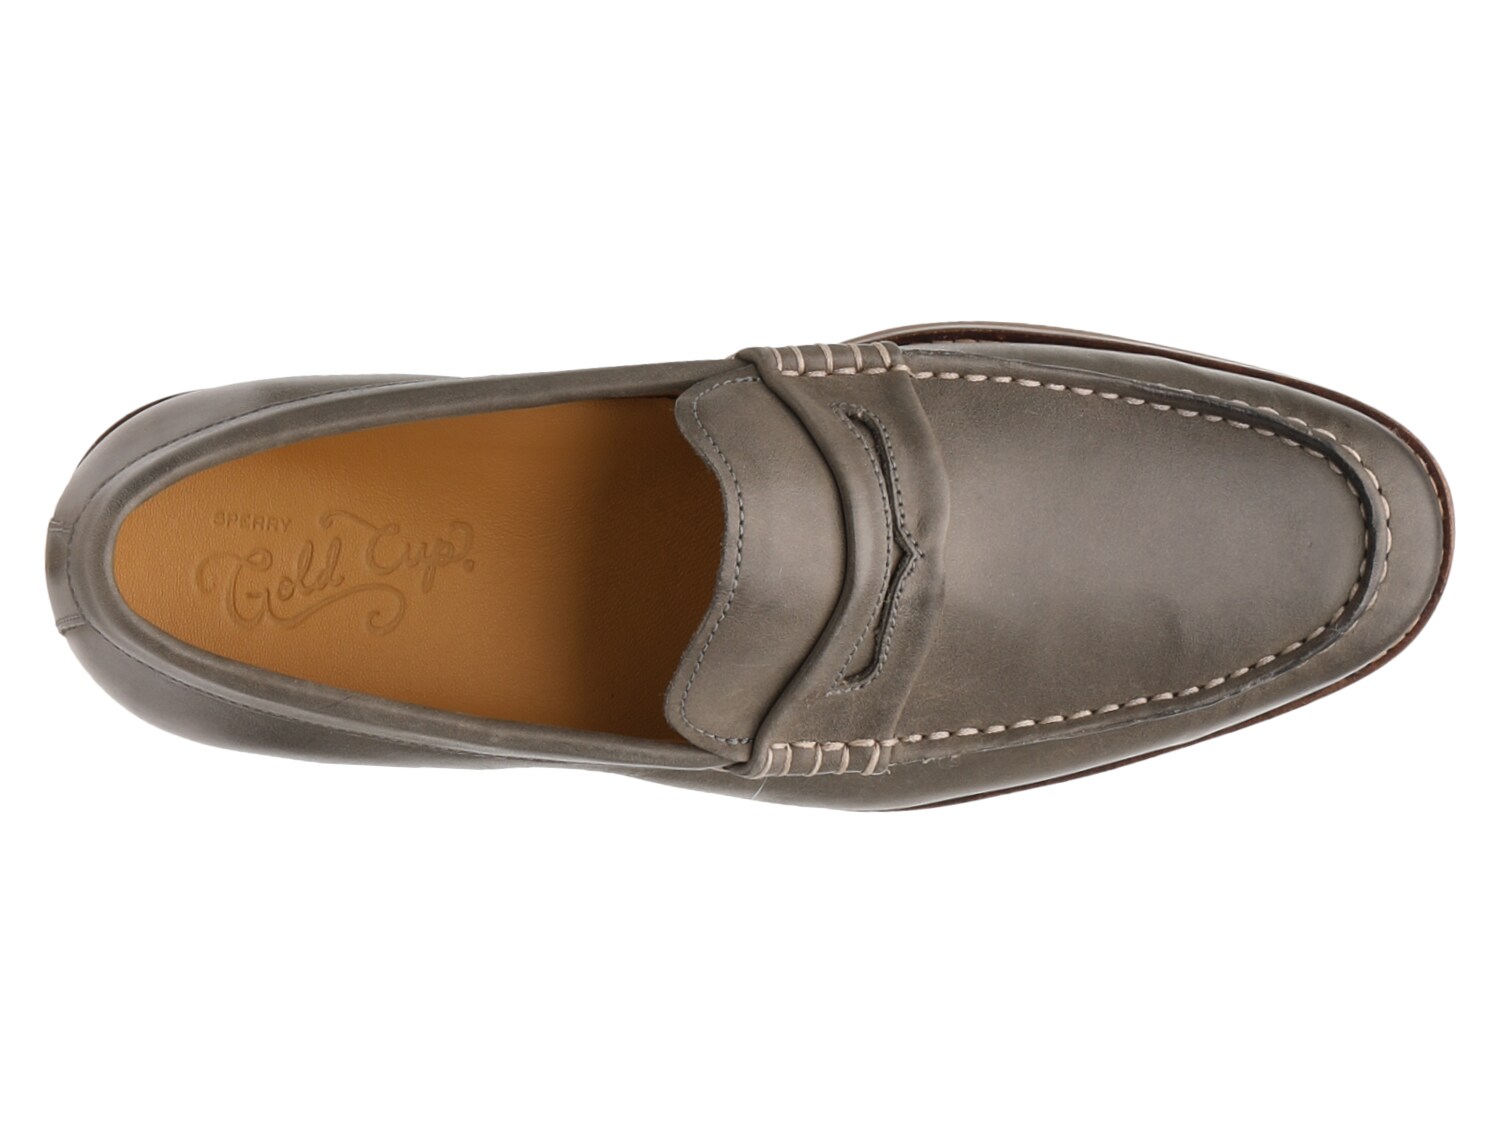 sperry gold cup exeter penny loafers